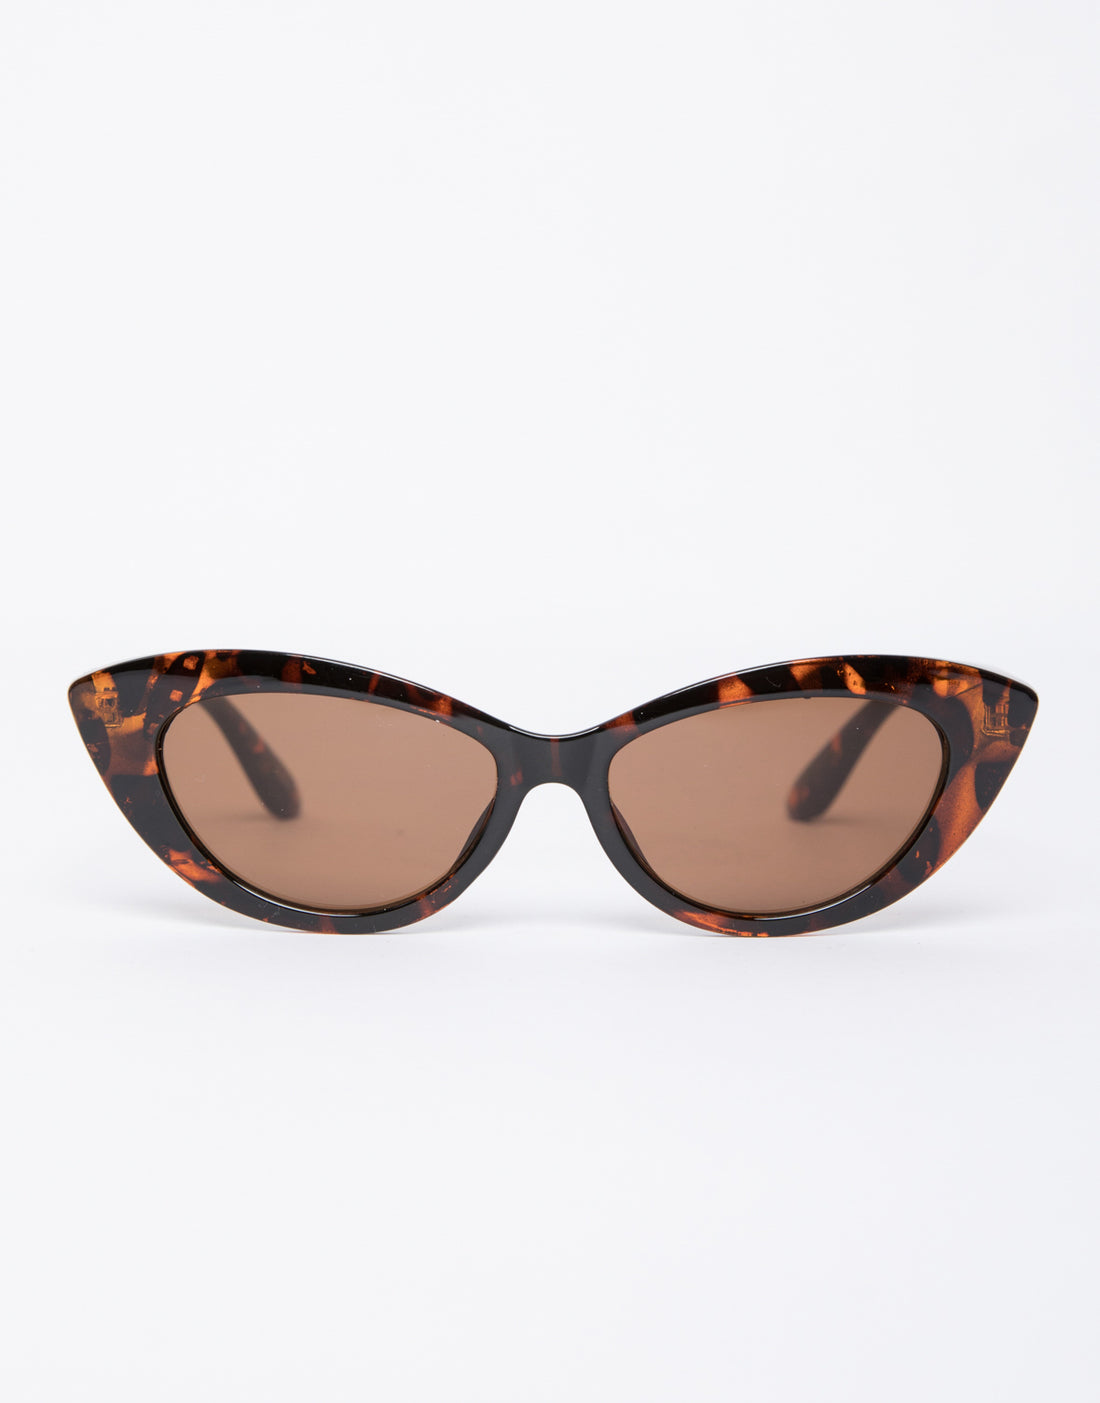 Off-duty Cat Eye Sunnies Accessories Tortoise One Size -2020AVE